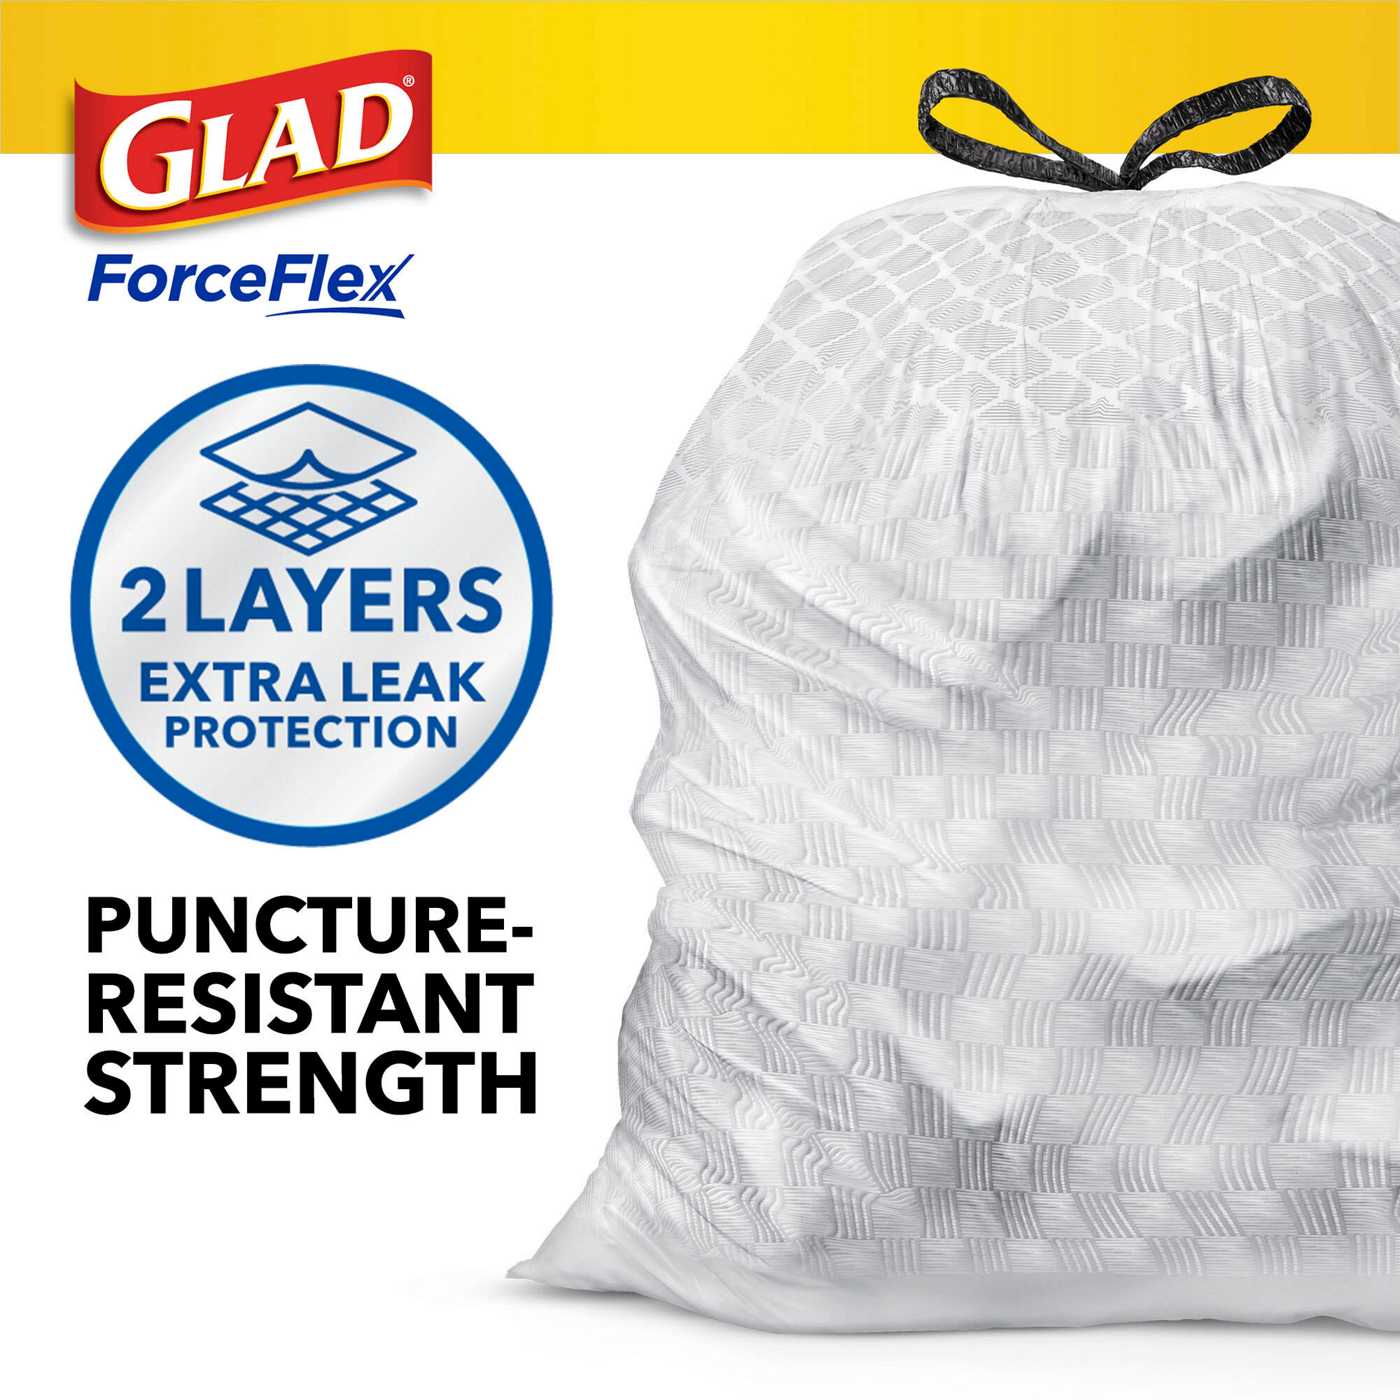 Glad ForceFlex Tall Kitchen Drawstring Trash Bags, 13 Gallon - Gain Original Scent with Febreeze Freshness; image 2 of 3